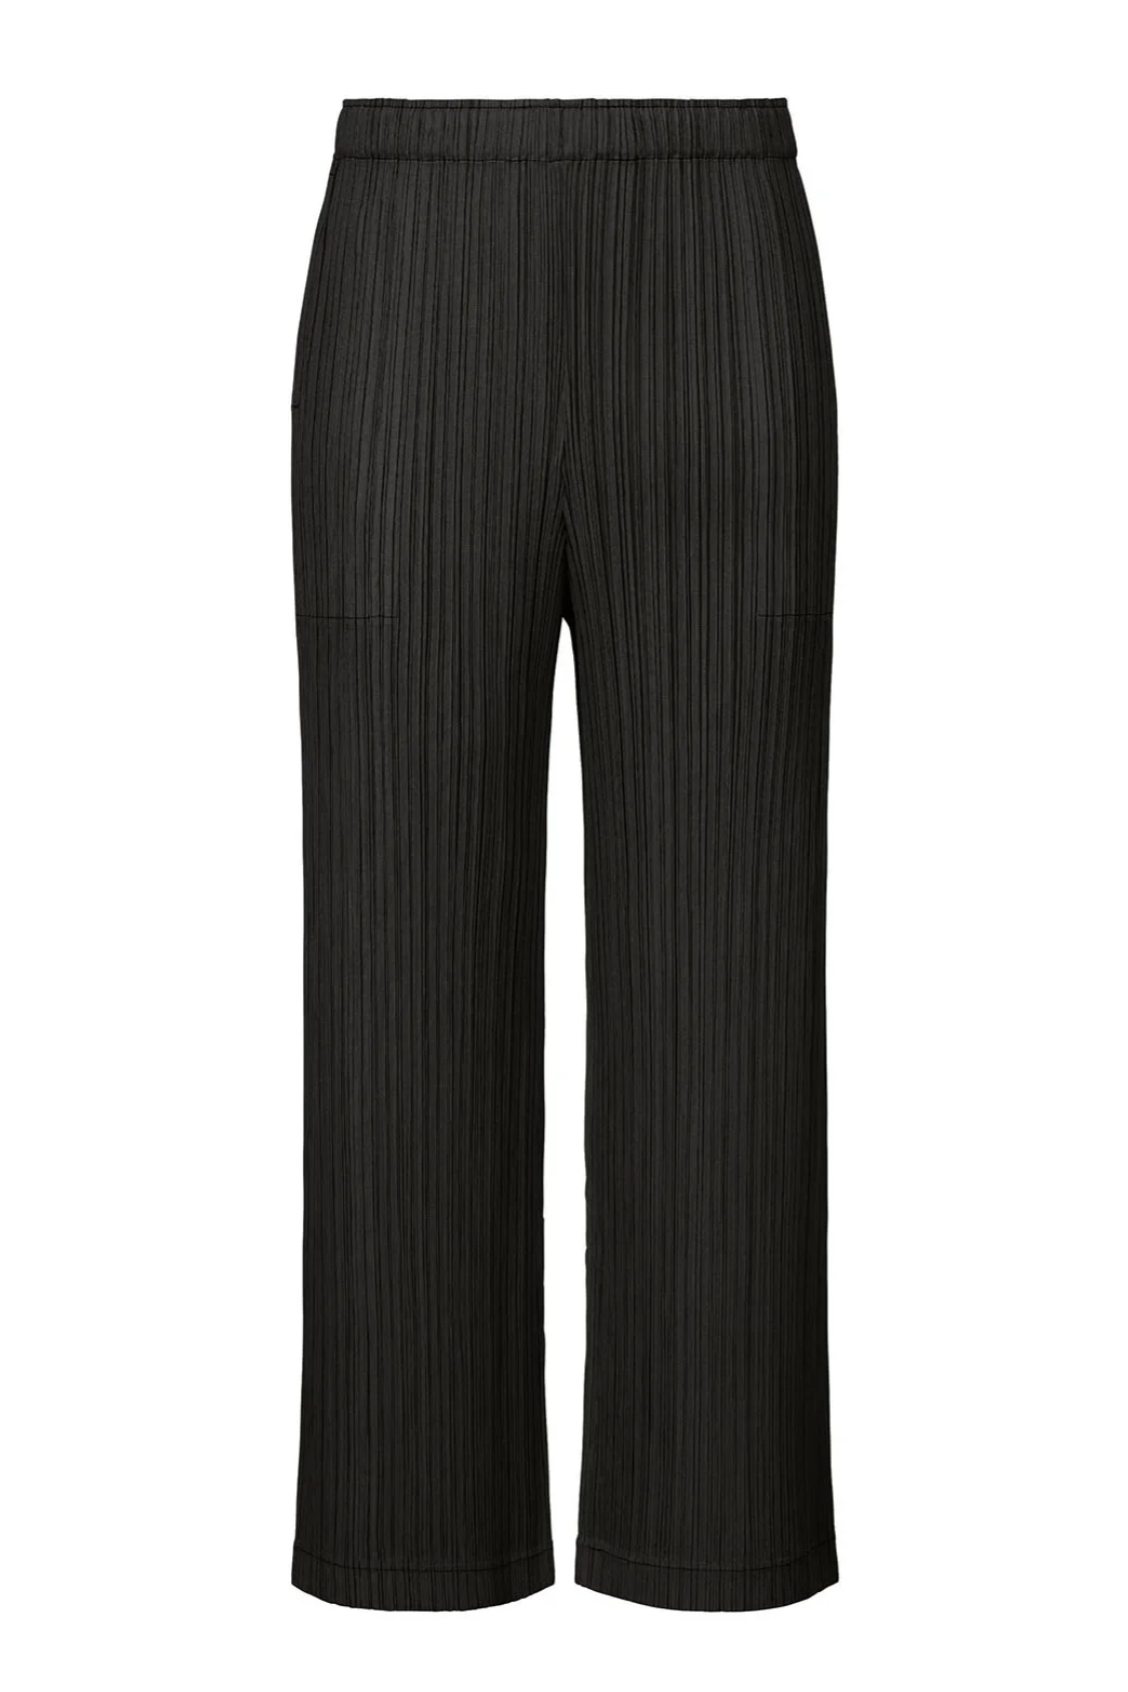 Thicker bottoms full-length straight pleated pants, black (carryover)